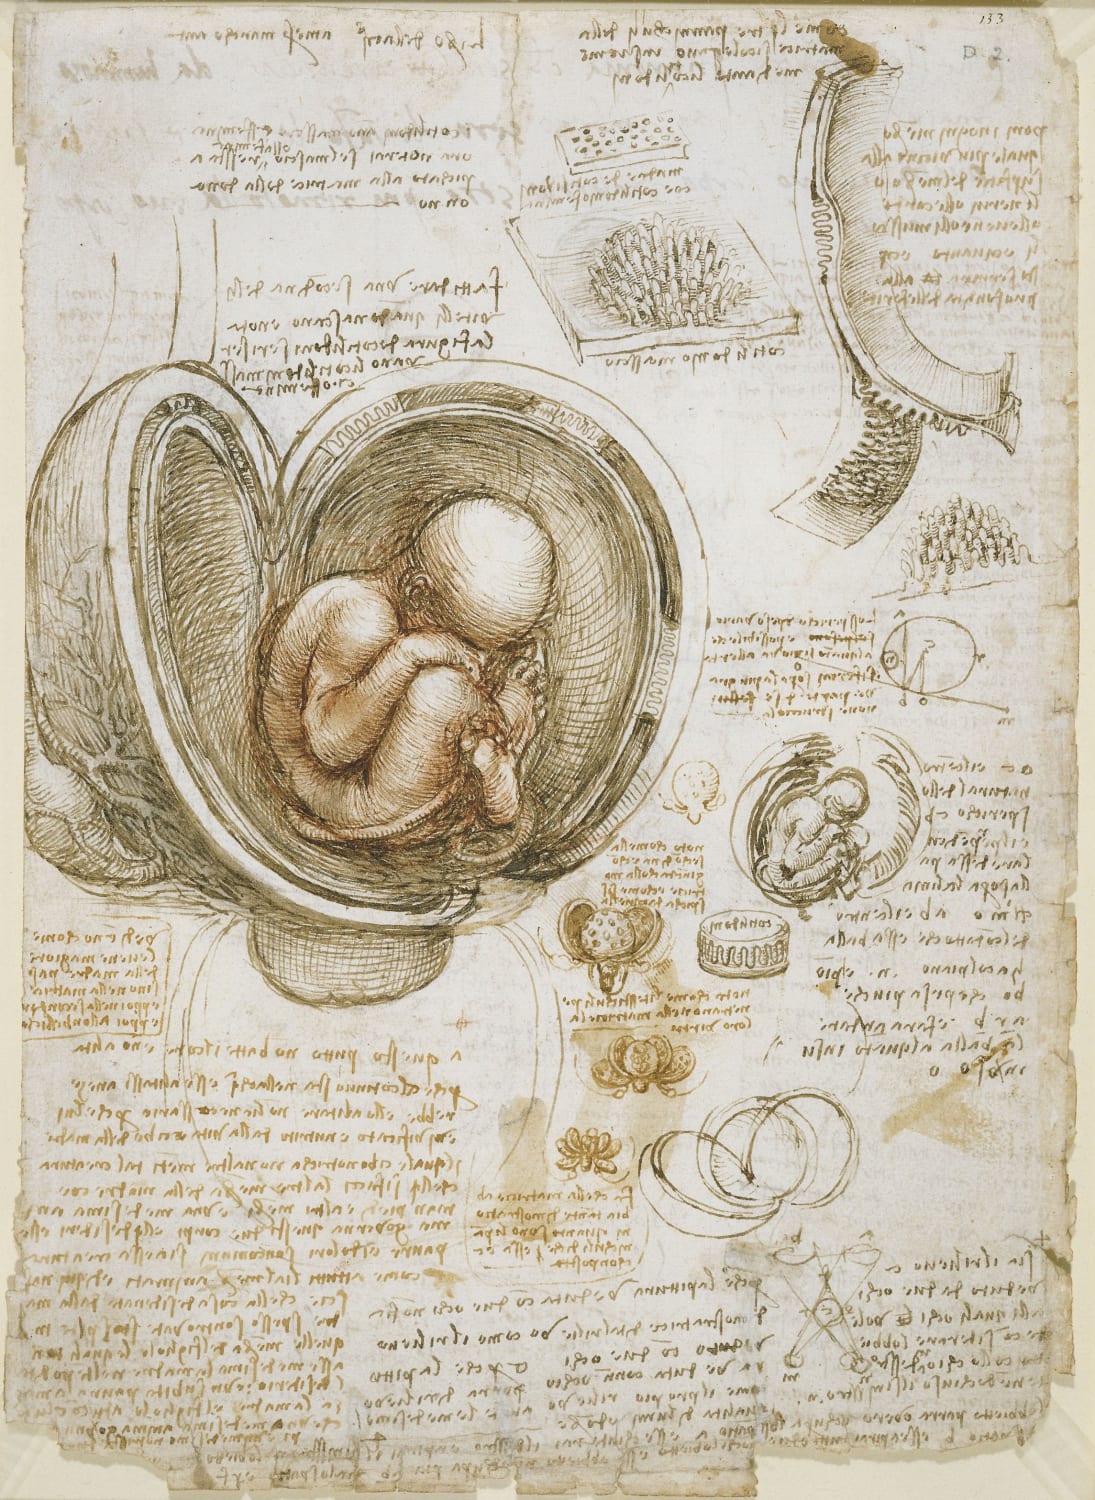 Part one of Da Vinci's "Studies of the Fetus in the Womb", ca. 1511, which correctly depicts a human fetus in a breech position inside a dissected uterus.